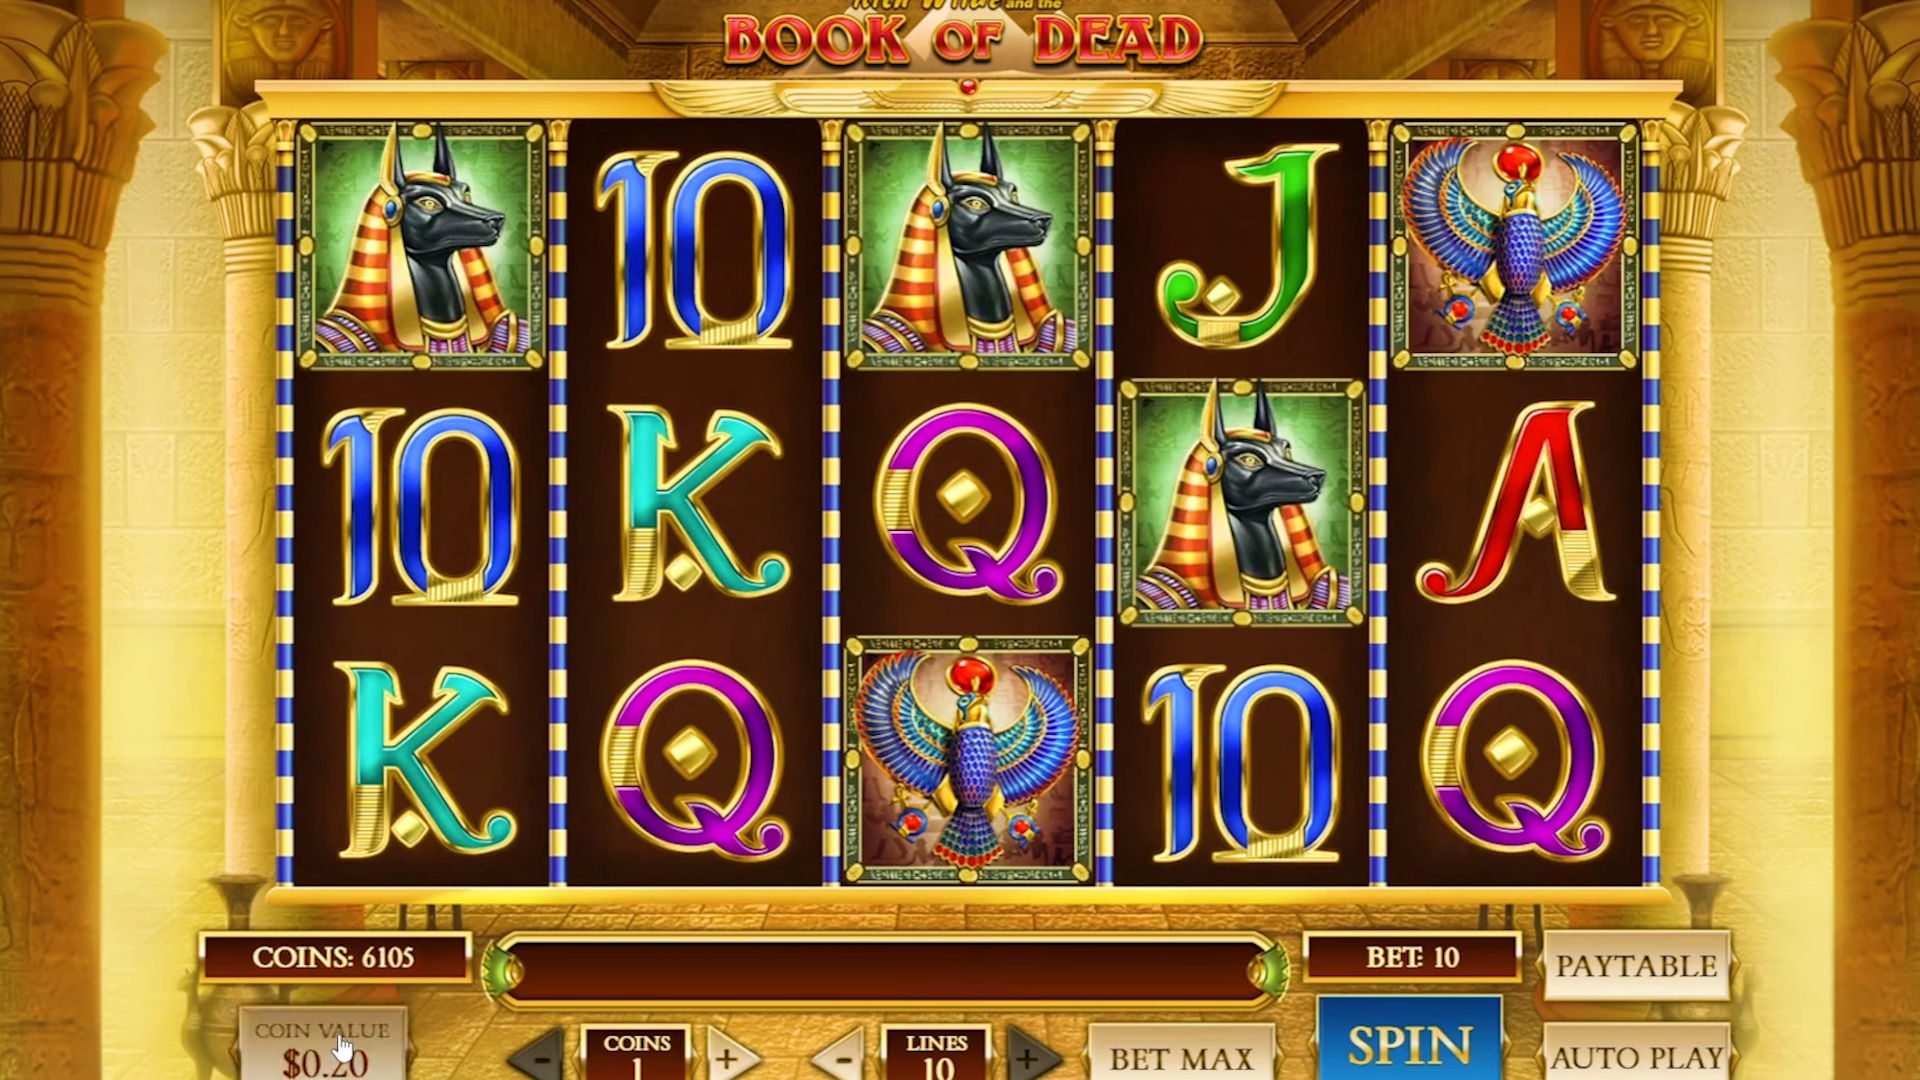 The main features of the Book of Dead casino slot mobile application